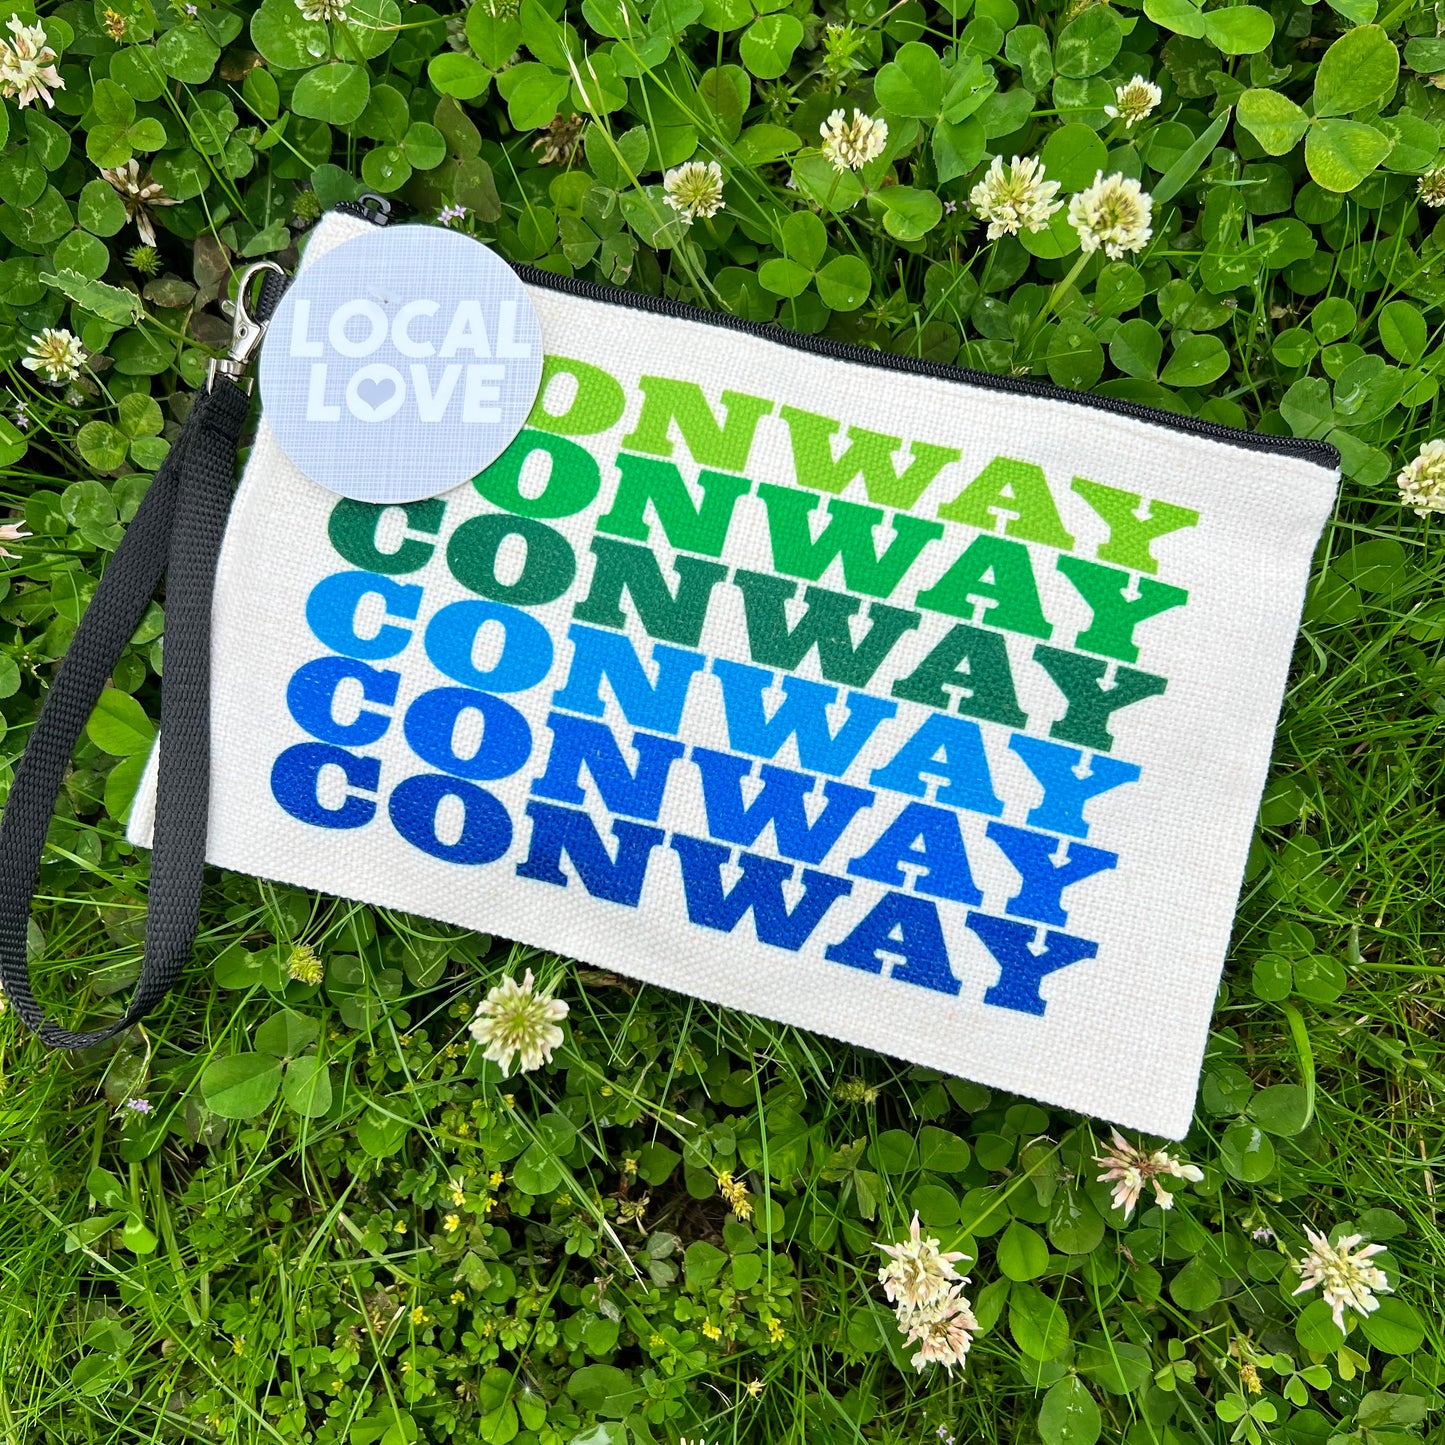 off-white zipper bag with "conway" printed in greens and blues colors laying in a field of clovers.